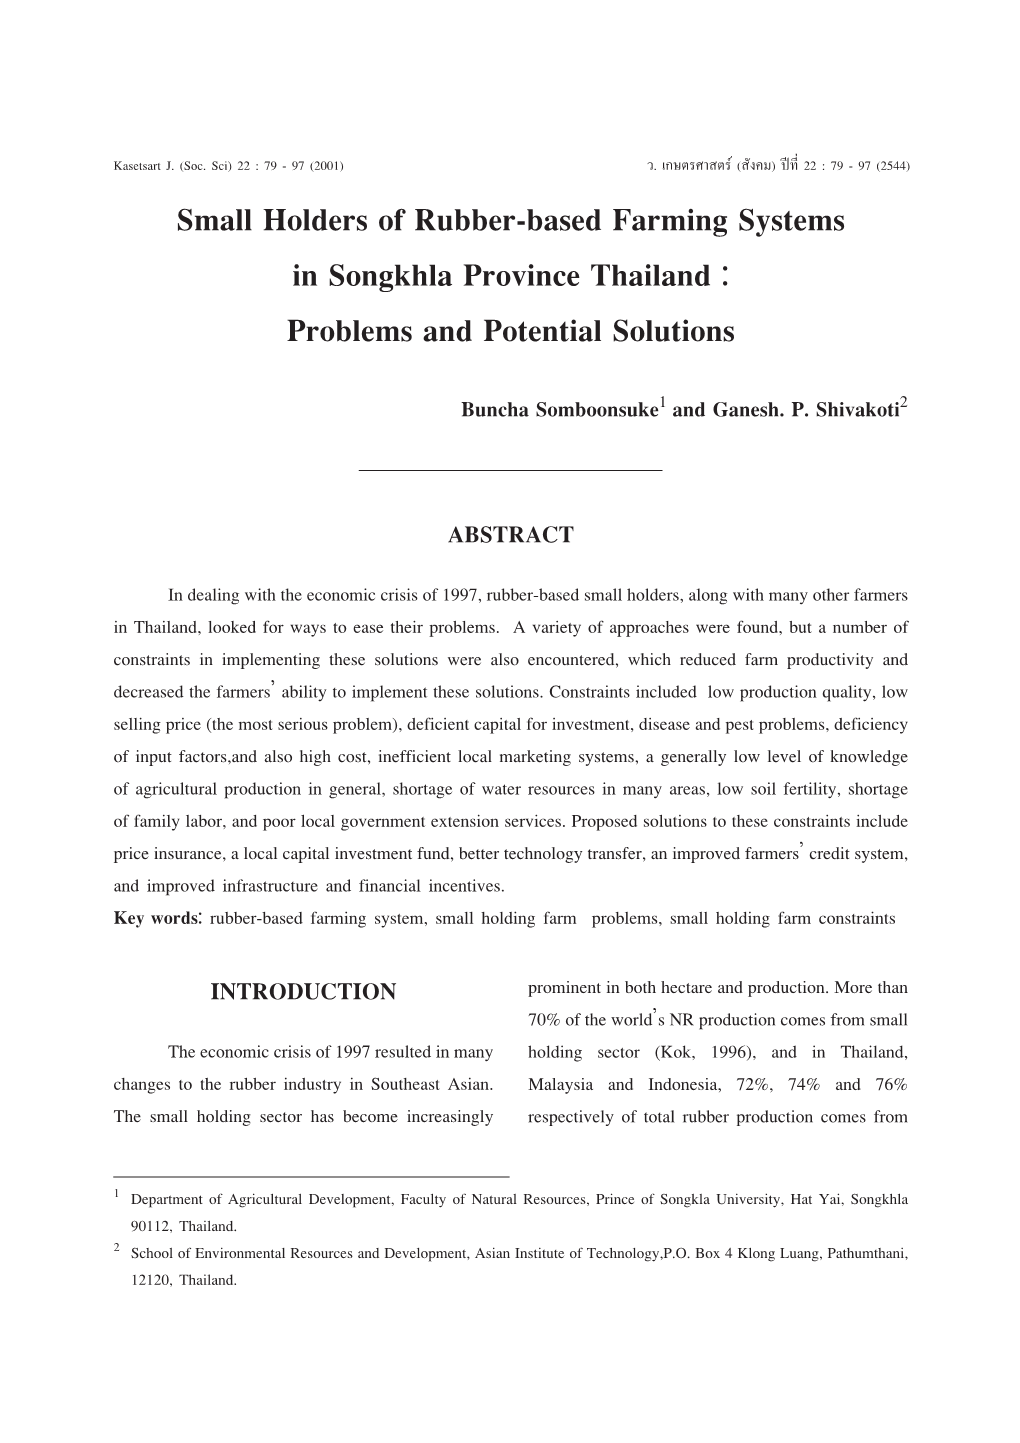 Small Holders of Rubber-Based Farming Systems in Songkhla Province Thailand : Problems and Potential Solutions